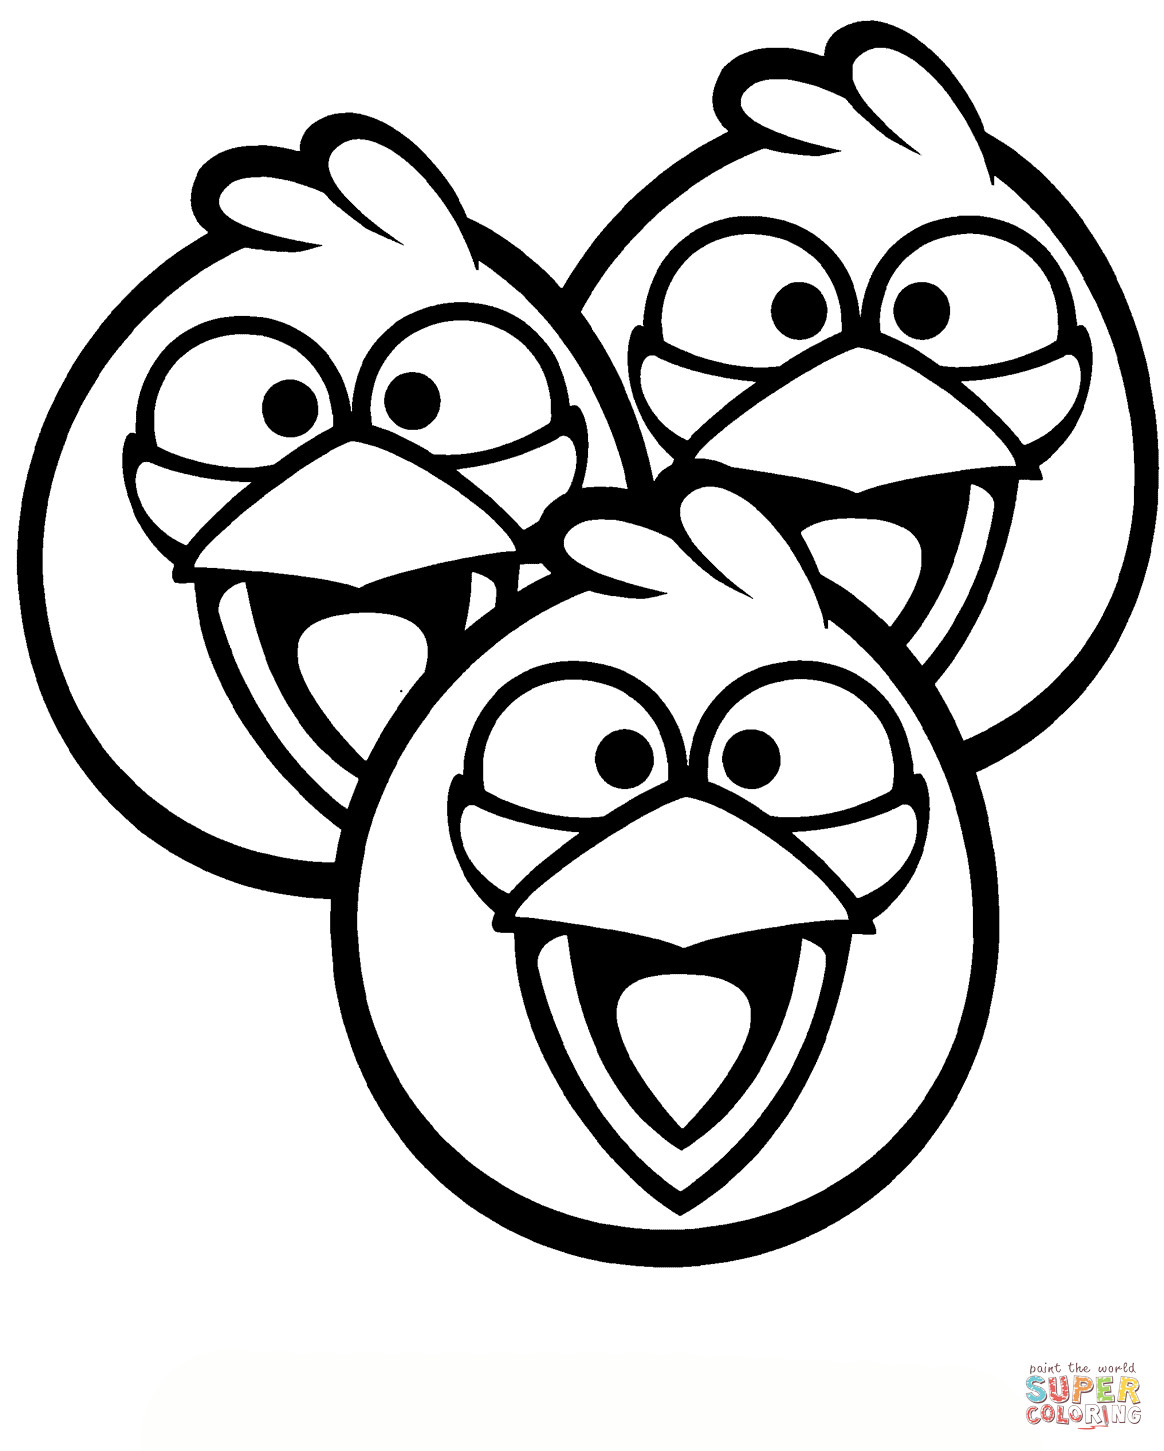 Angry Bird Printable Coloring Pages
 Angry Bird Coloring Pages Pdf at GetColorings